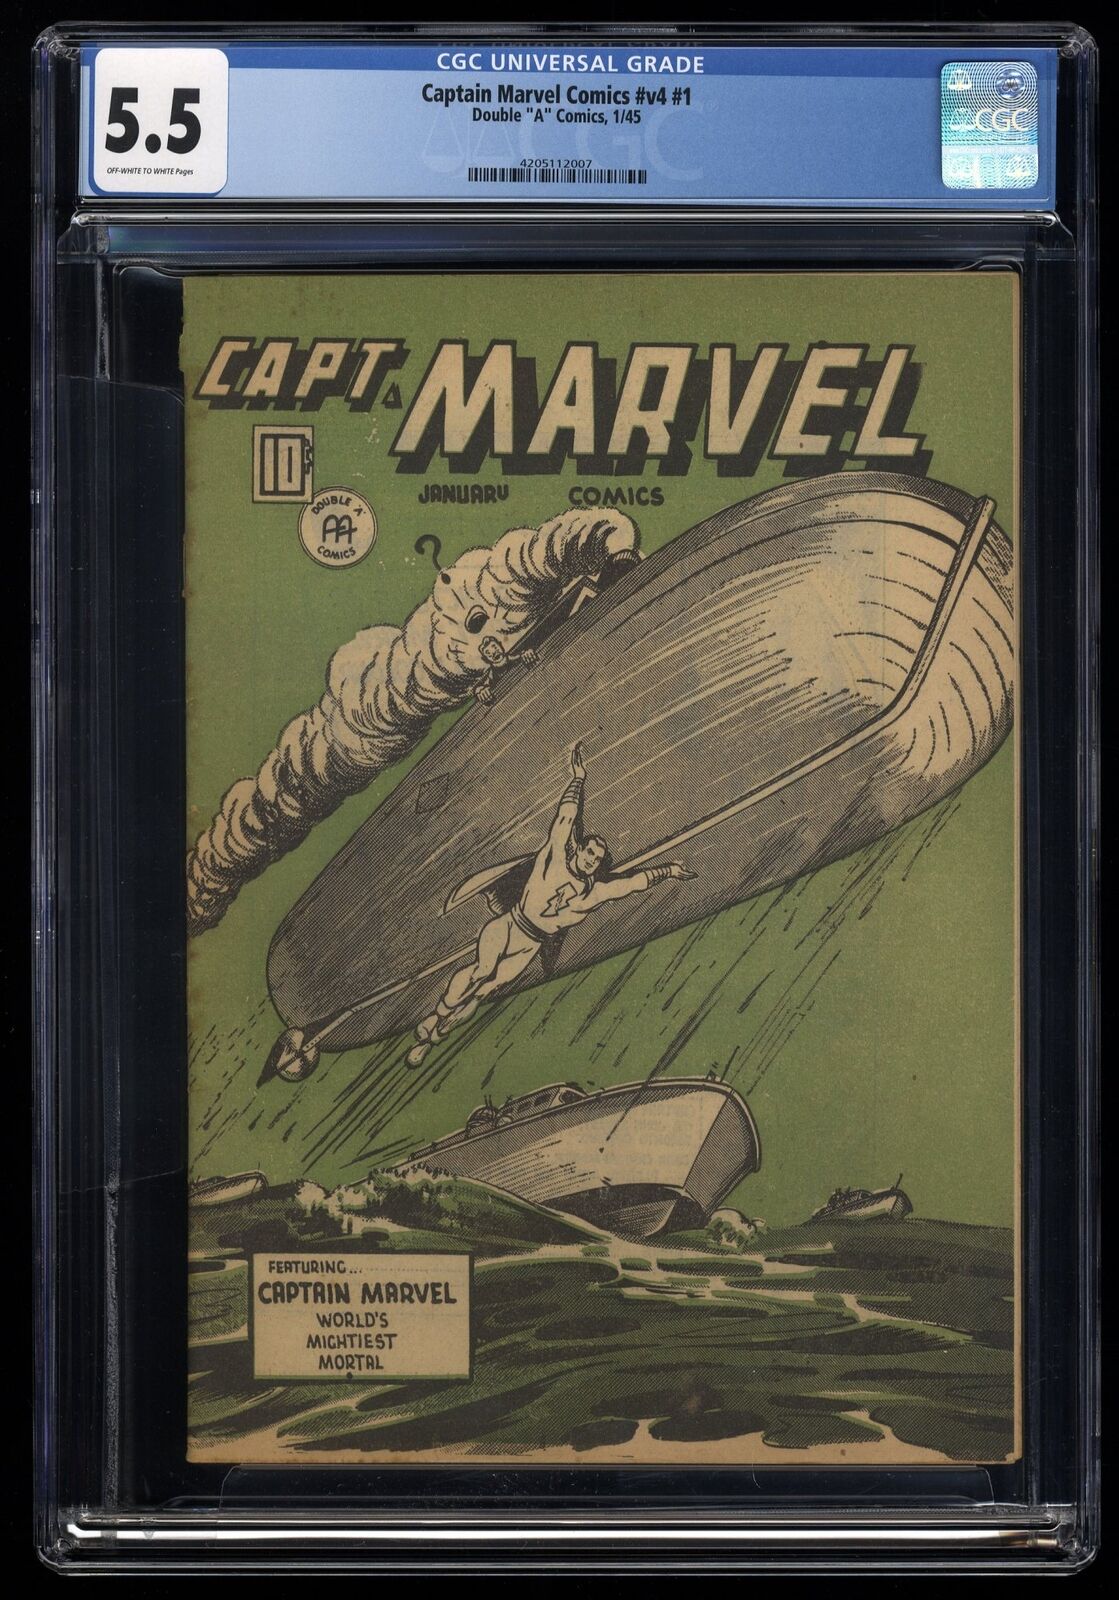 Captain Marvel Comics (1942) v4 #1 CGC FN- 5.5 Off White to White Double A 1945